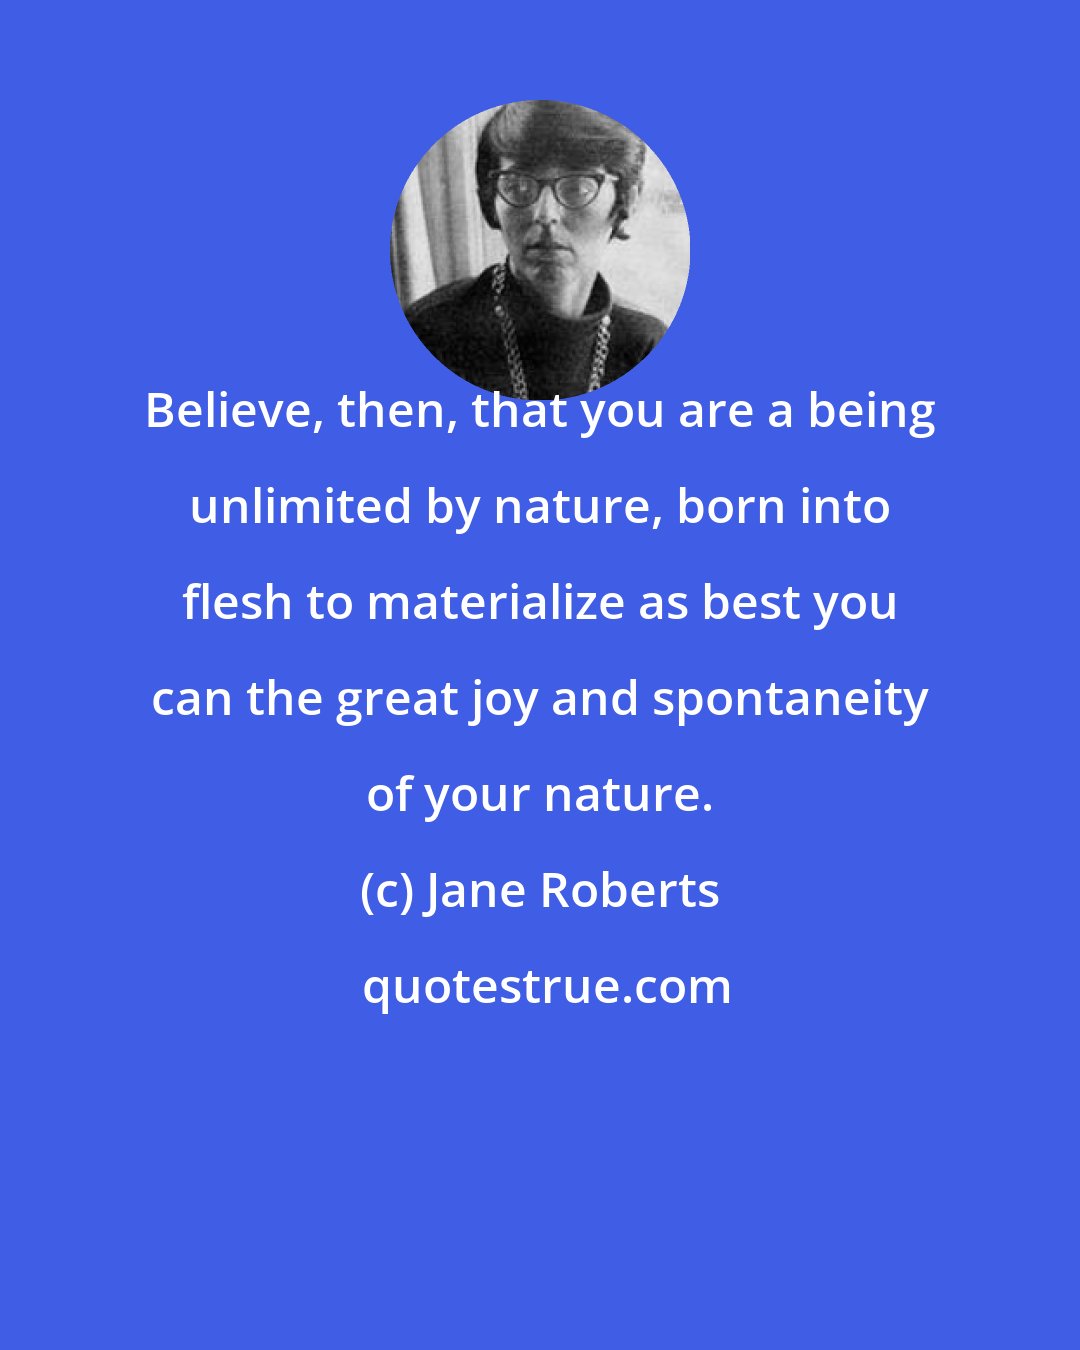 Jane Roberts: Believe, then, that you are a being unlimited by nature, born into flesh to materialize as best you can the great joy and spontaneity of your nature.